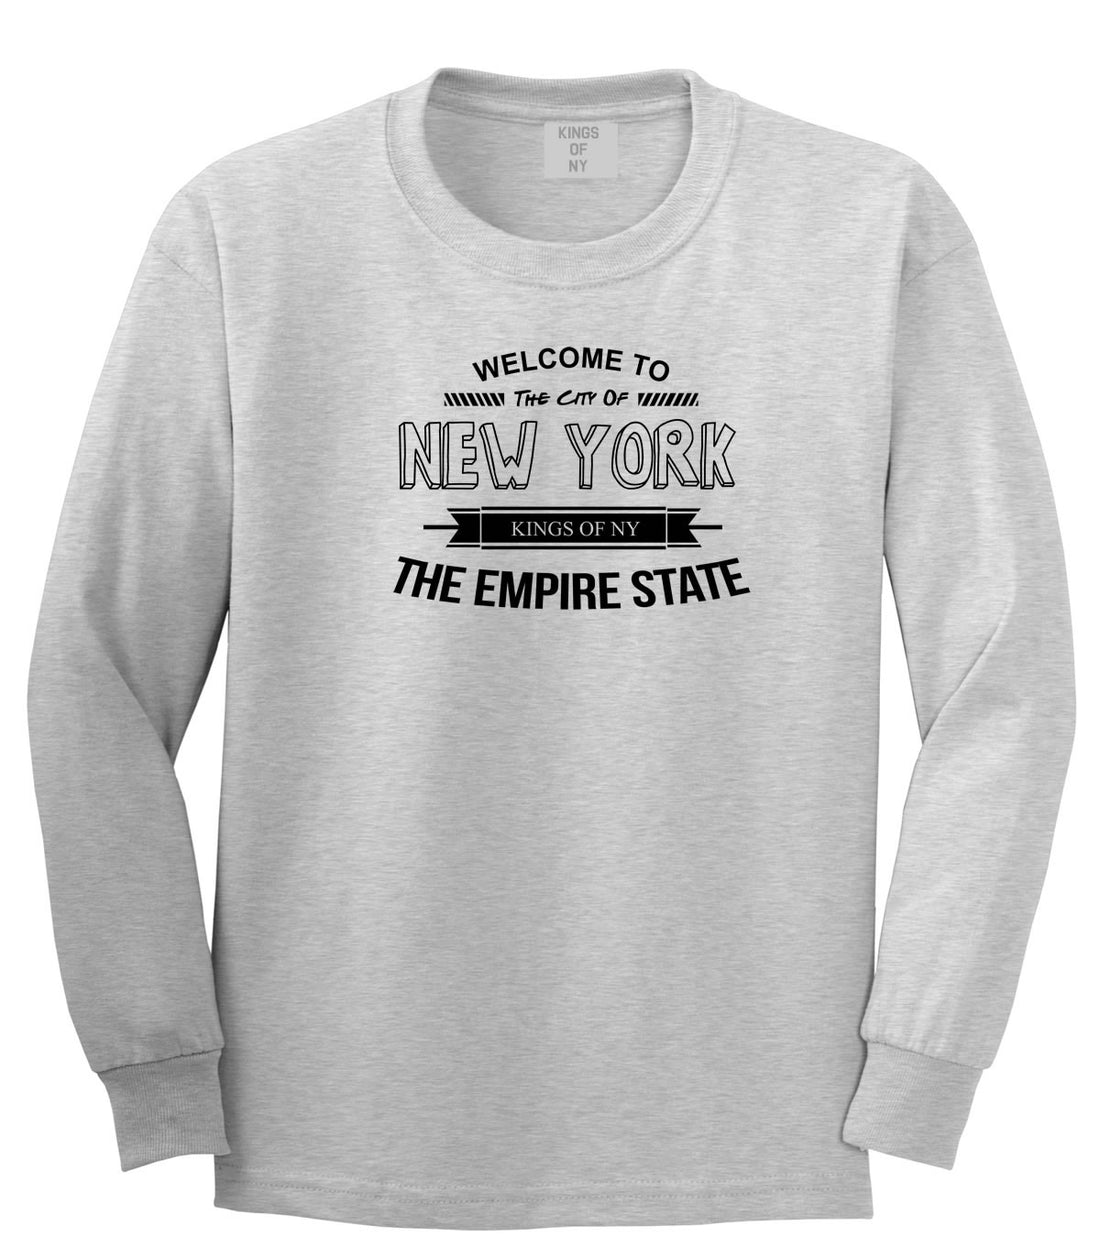 Empire State New York Long Sleeve T-Shirt in Grey by Kings Of NY